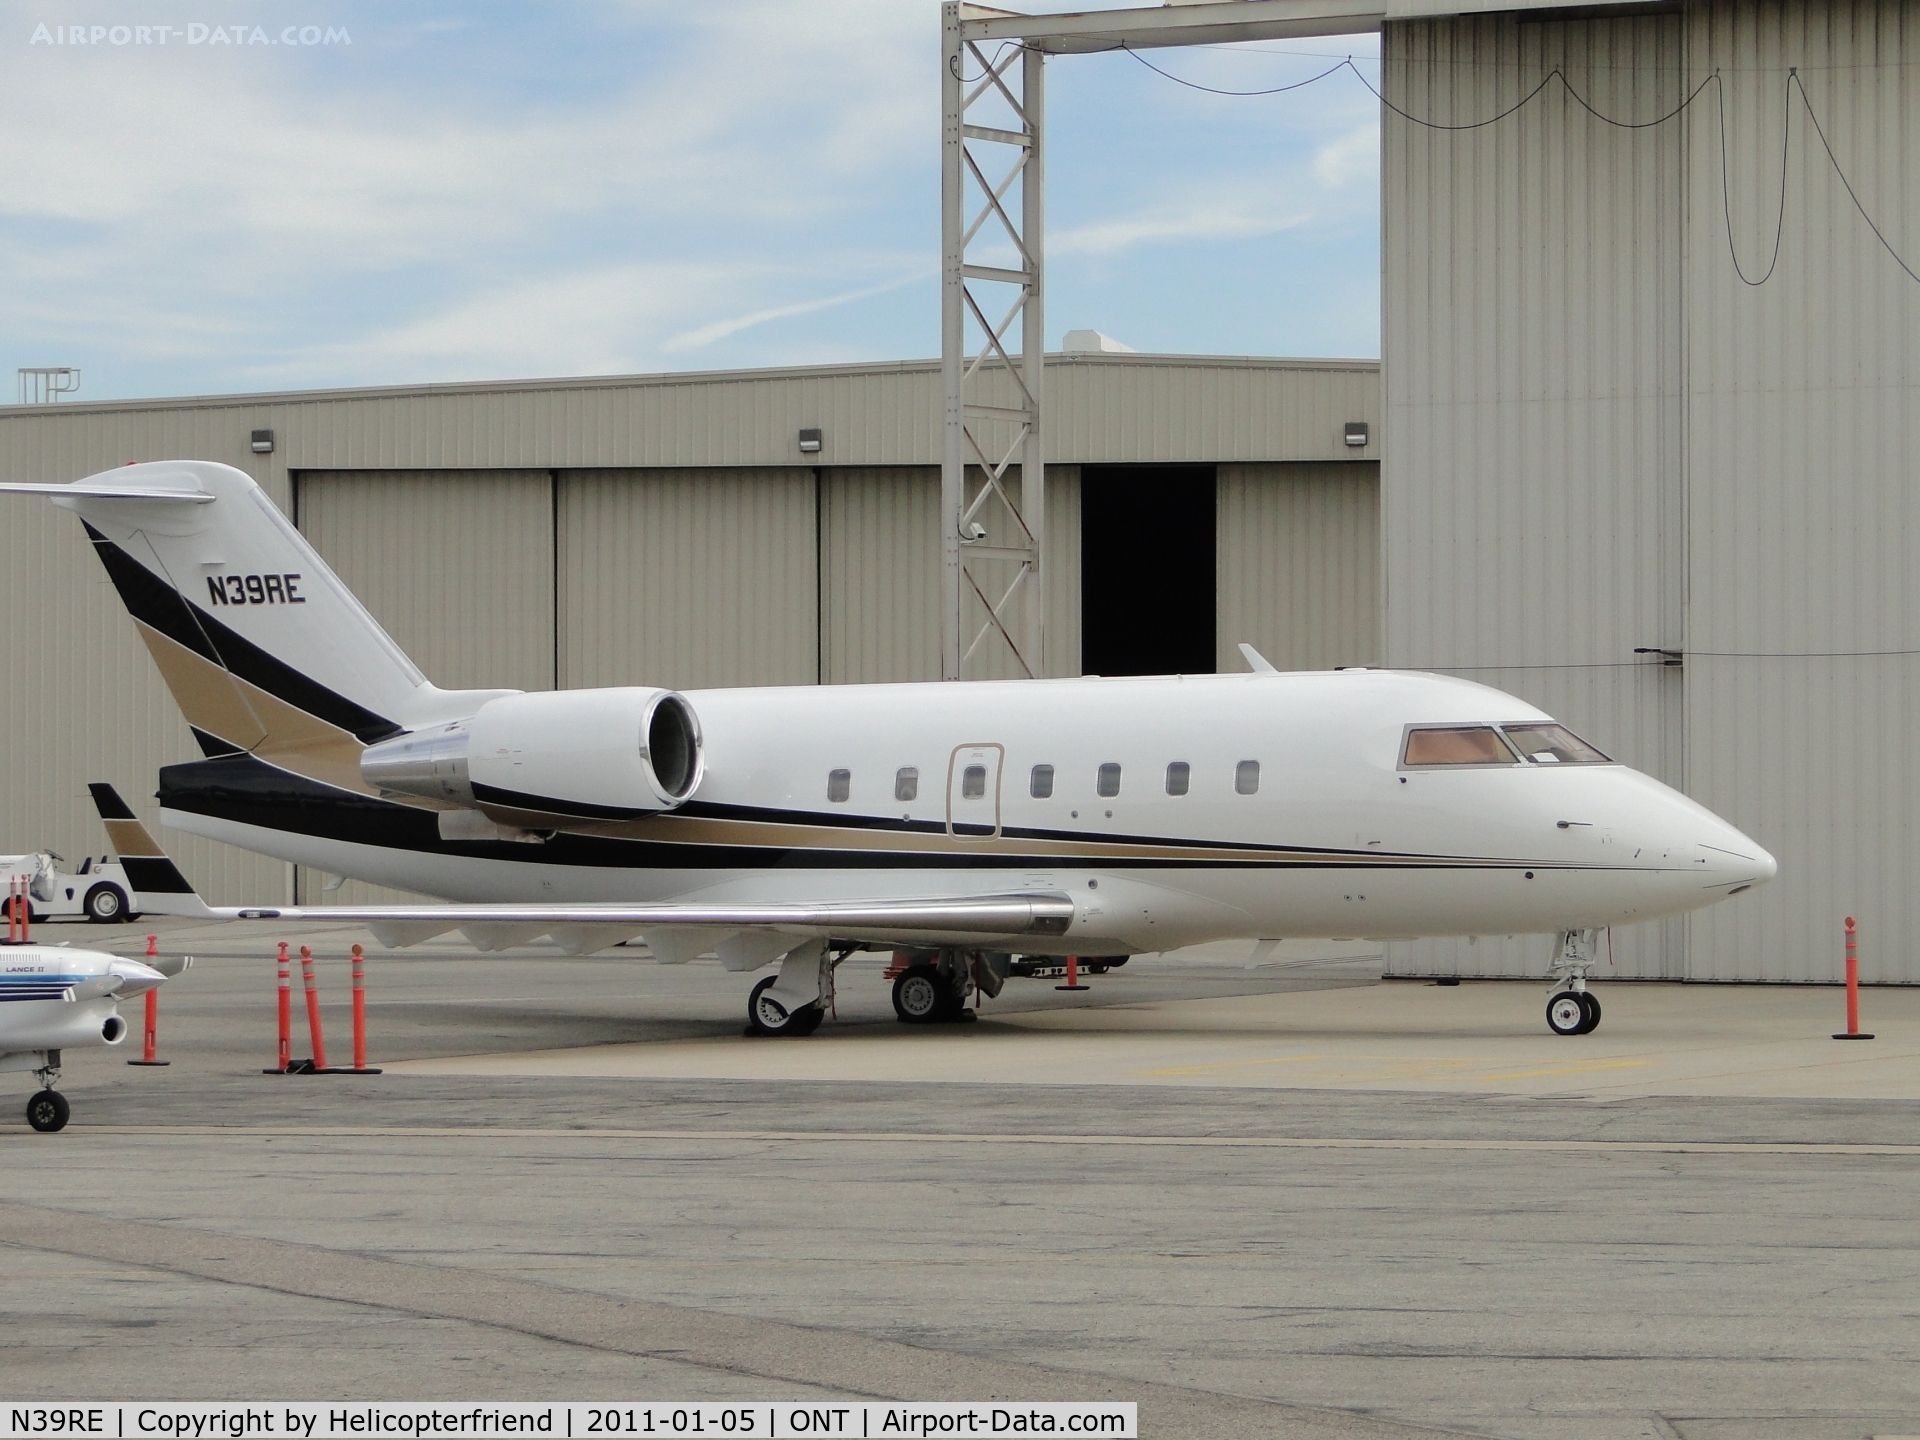 N39RE, 1988 Canadair Challenger 601-3A (CL-600-2B16) C/N 5020, Parked on the southside